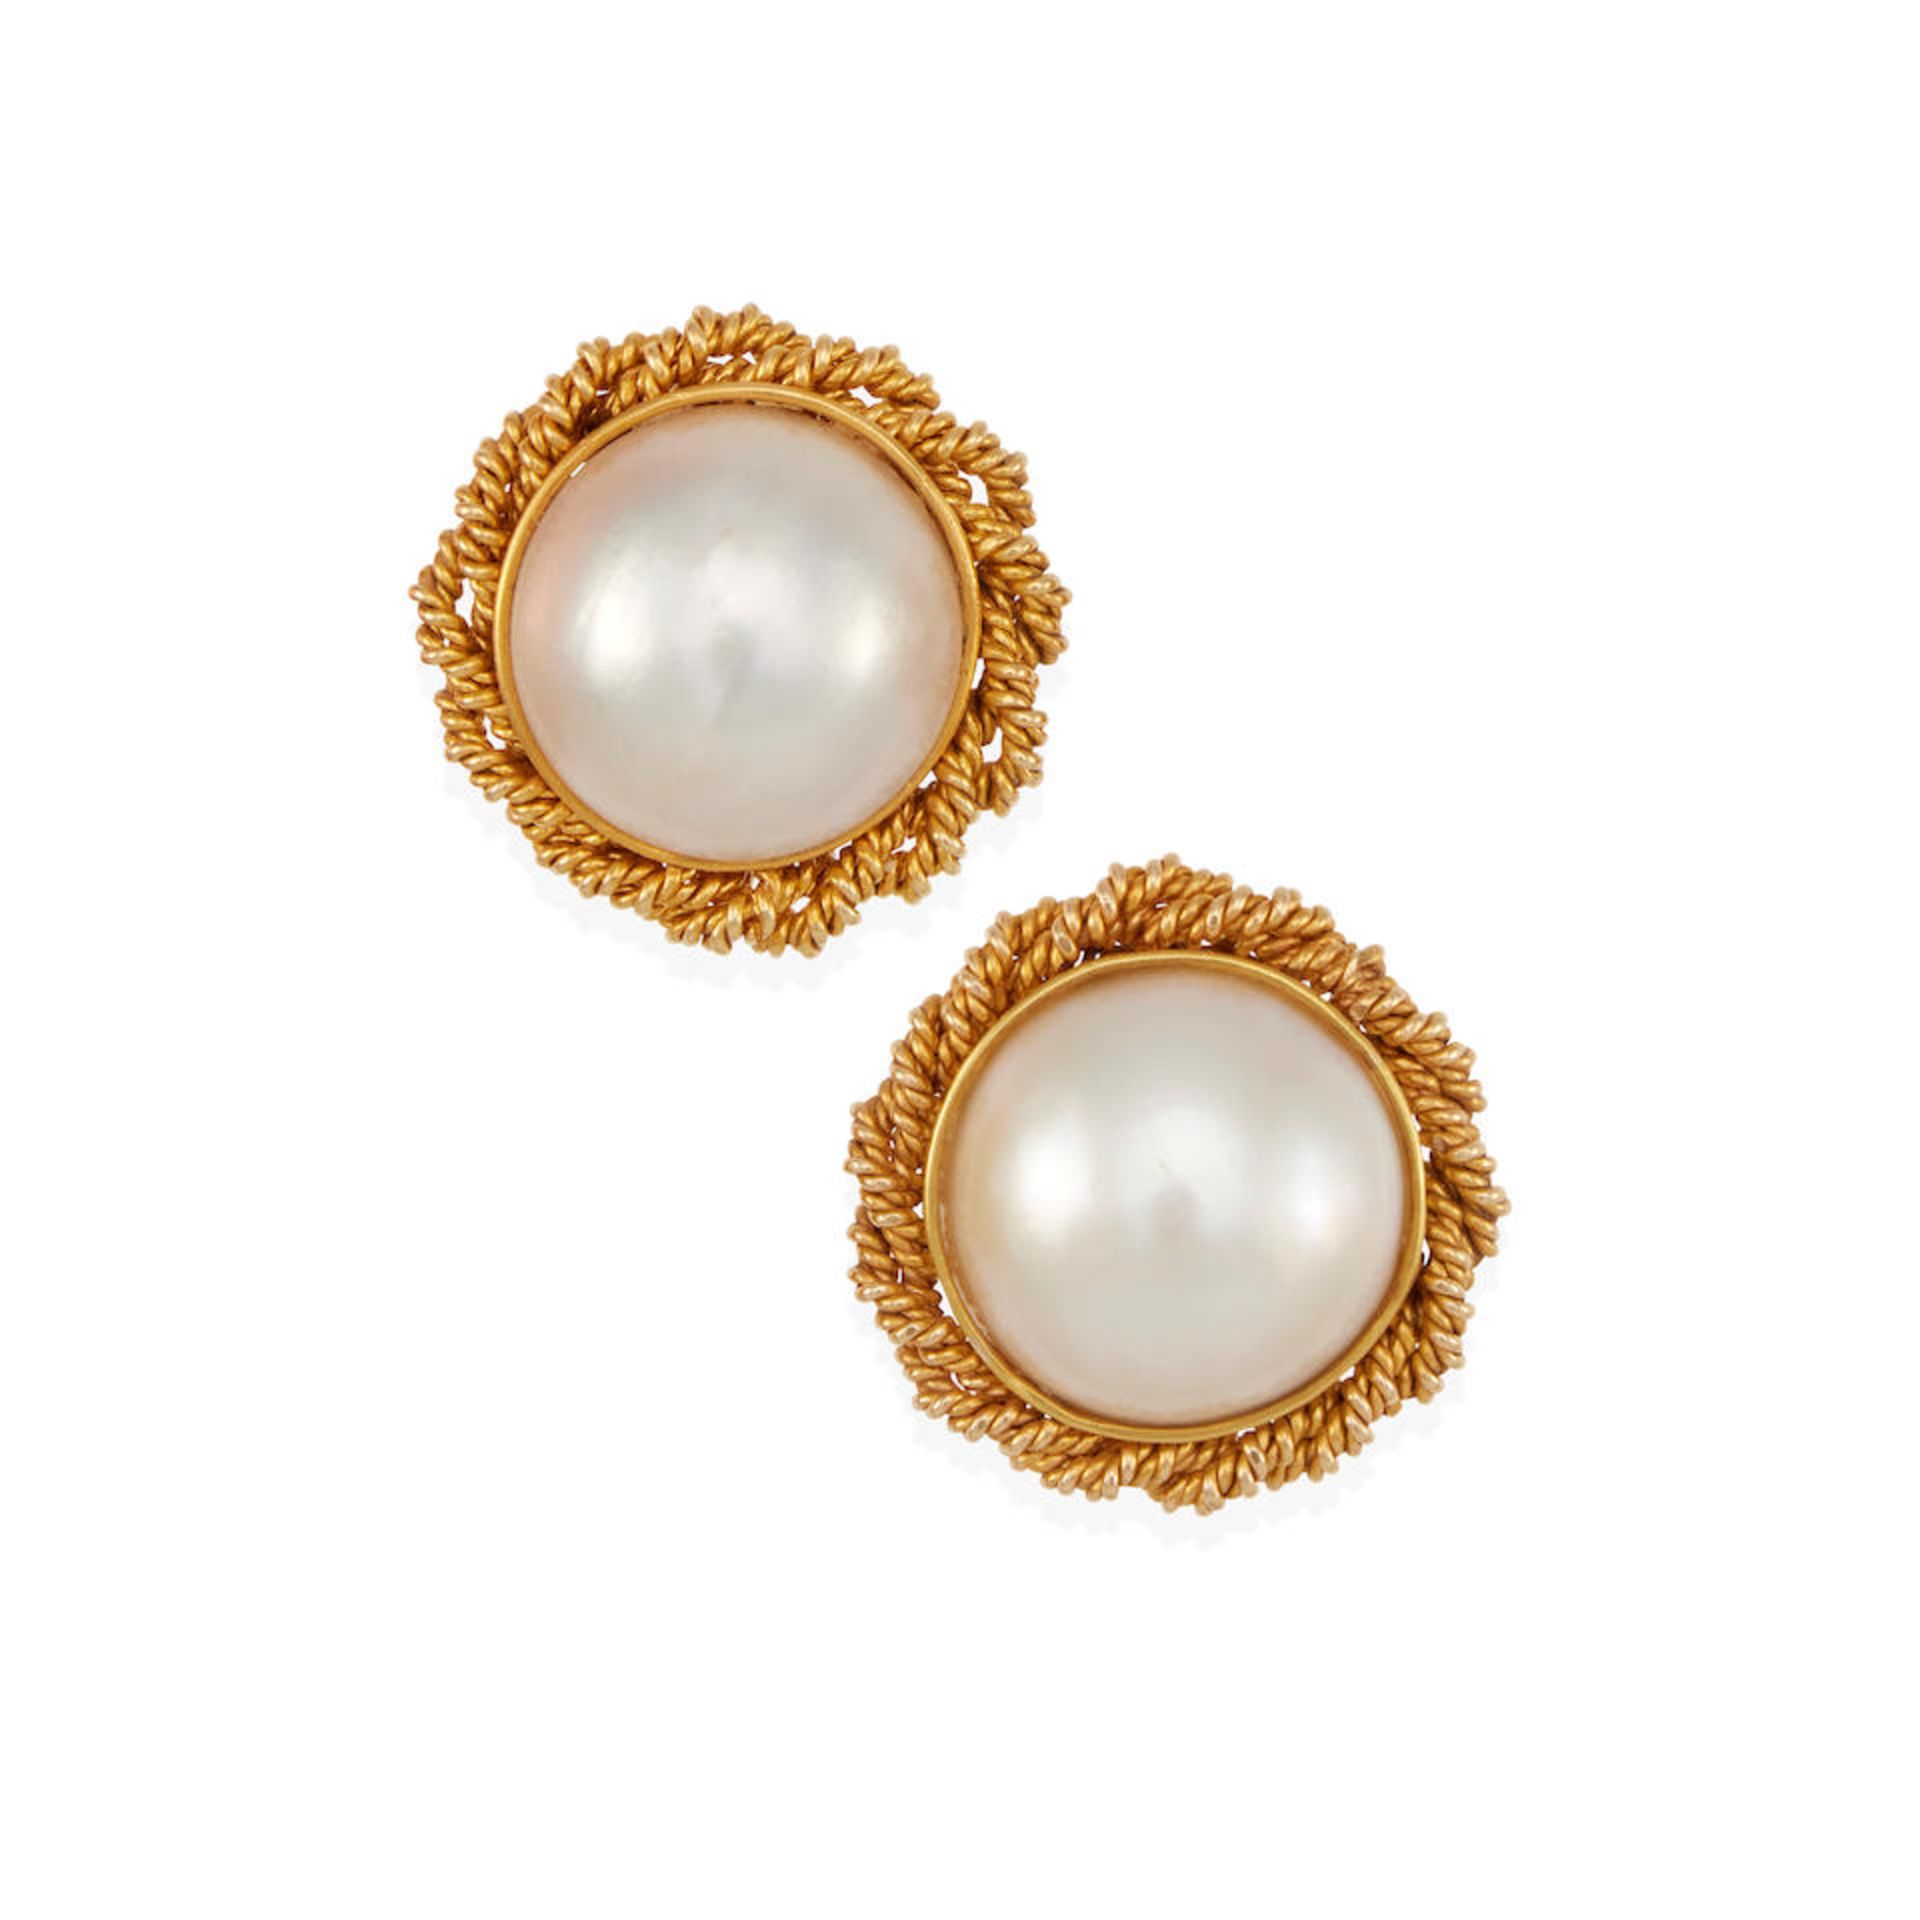 A PAIR OF 14K GOLD AND MABÉ PEARL EARCLIPS